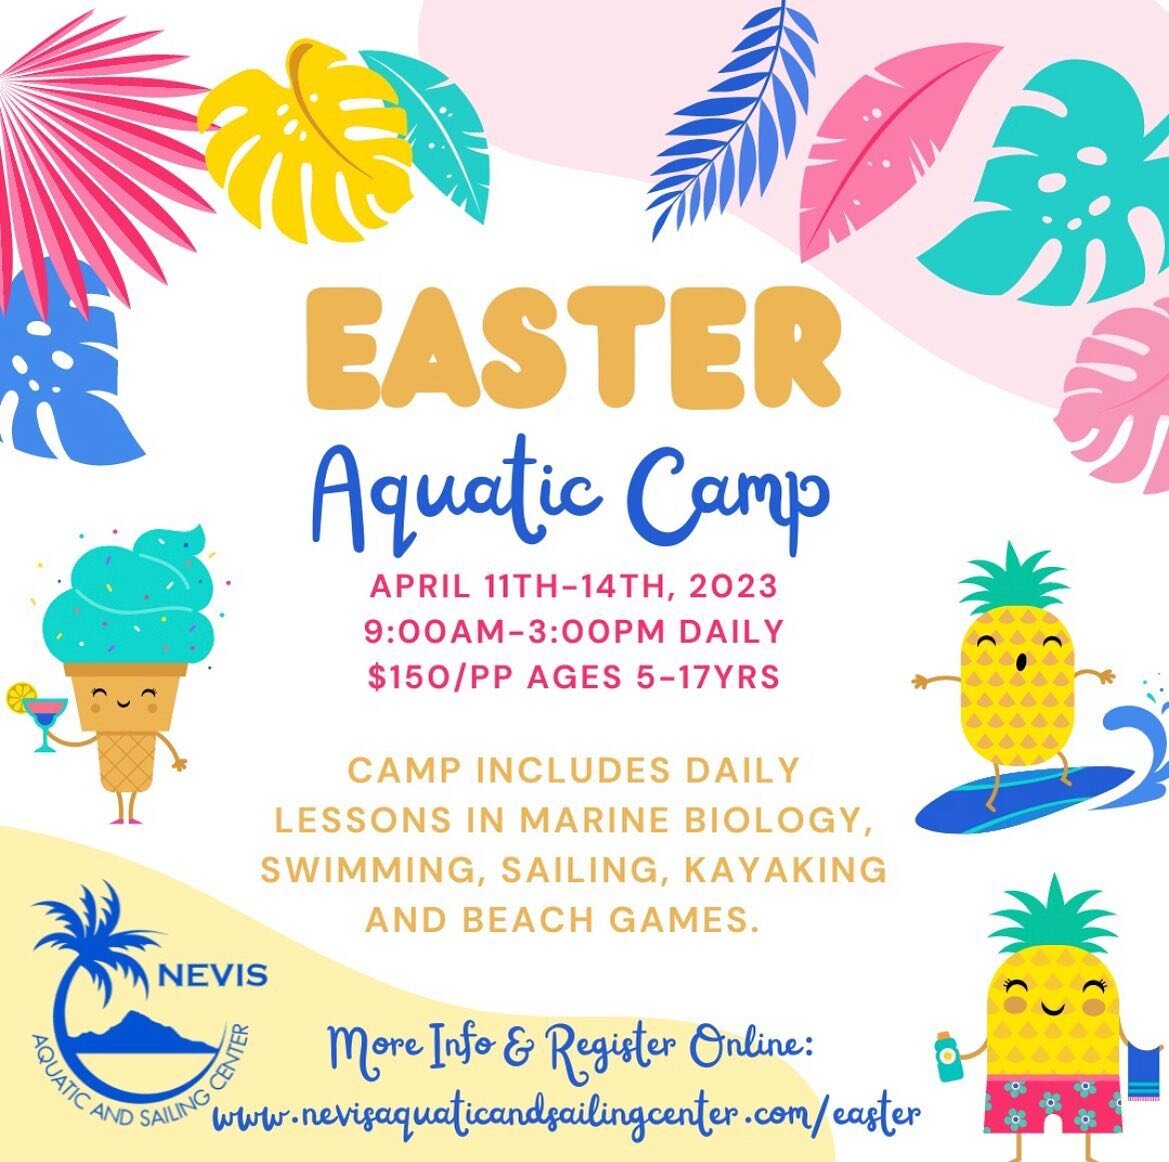 Registration is now open for our annual Easter Aquatic Camp! 

Join us for Swimming, Sailing and Marine Fun! 

Register online at
Www.nevisaquaticandsailingcenter.com/Easter